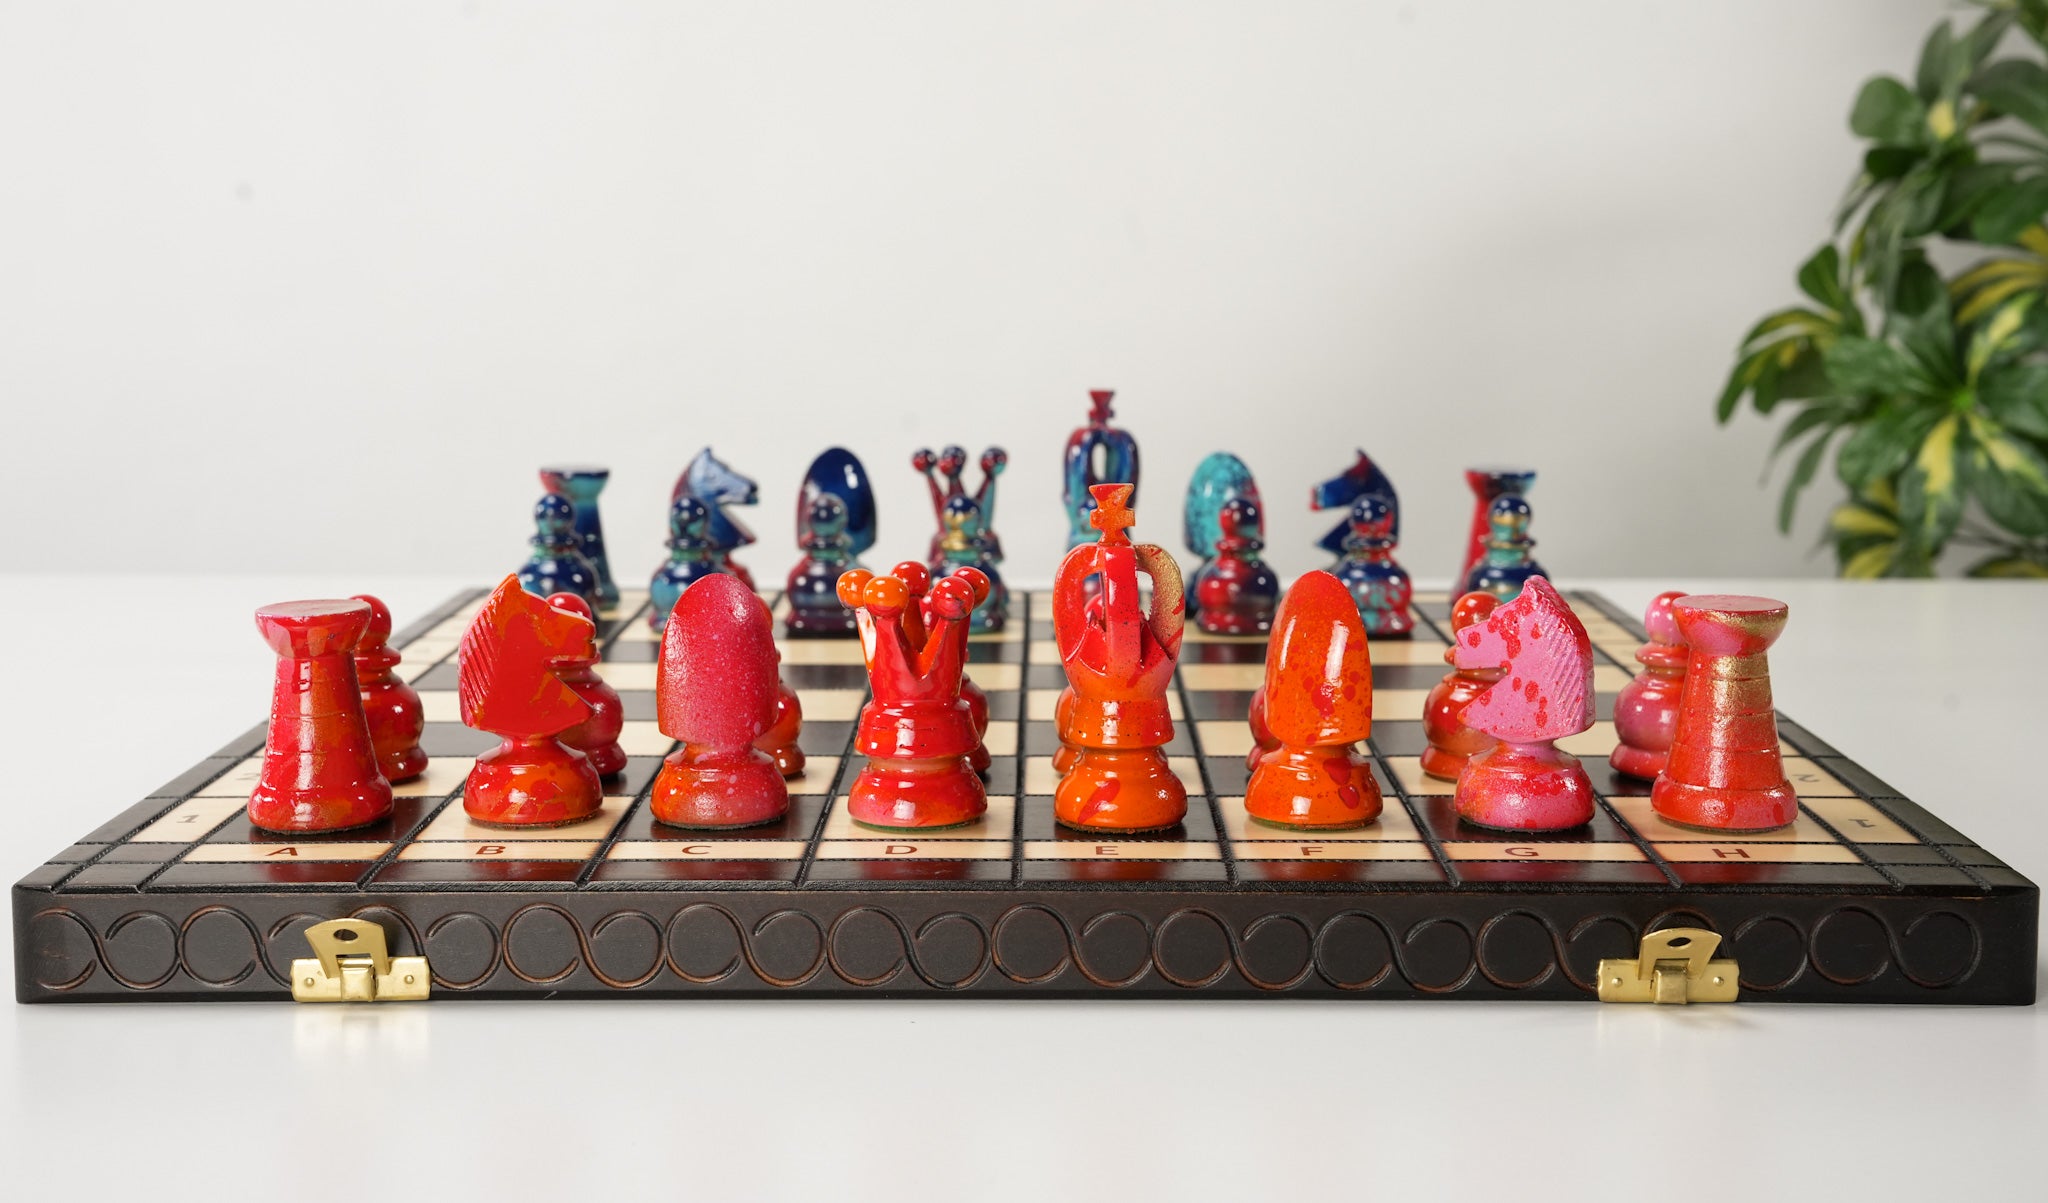 The Touch of the Renaissance Man - Sydney Gruber Painted 17" Large Kings Chess Set #5 - Chess Set - Chess-House